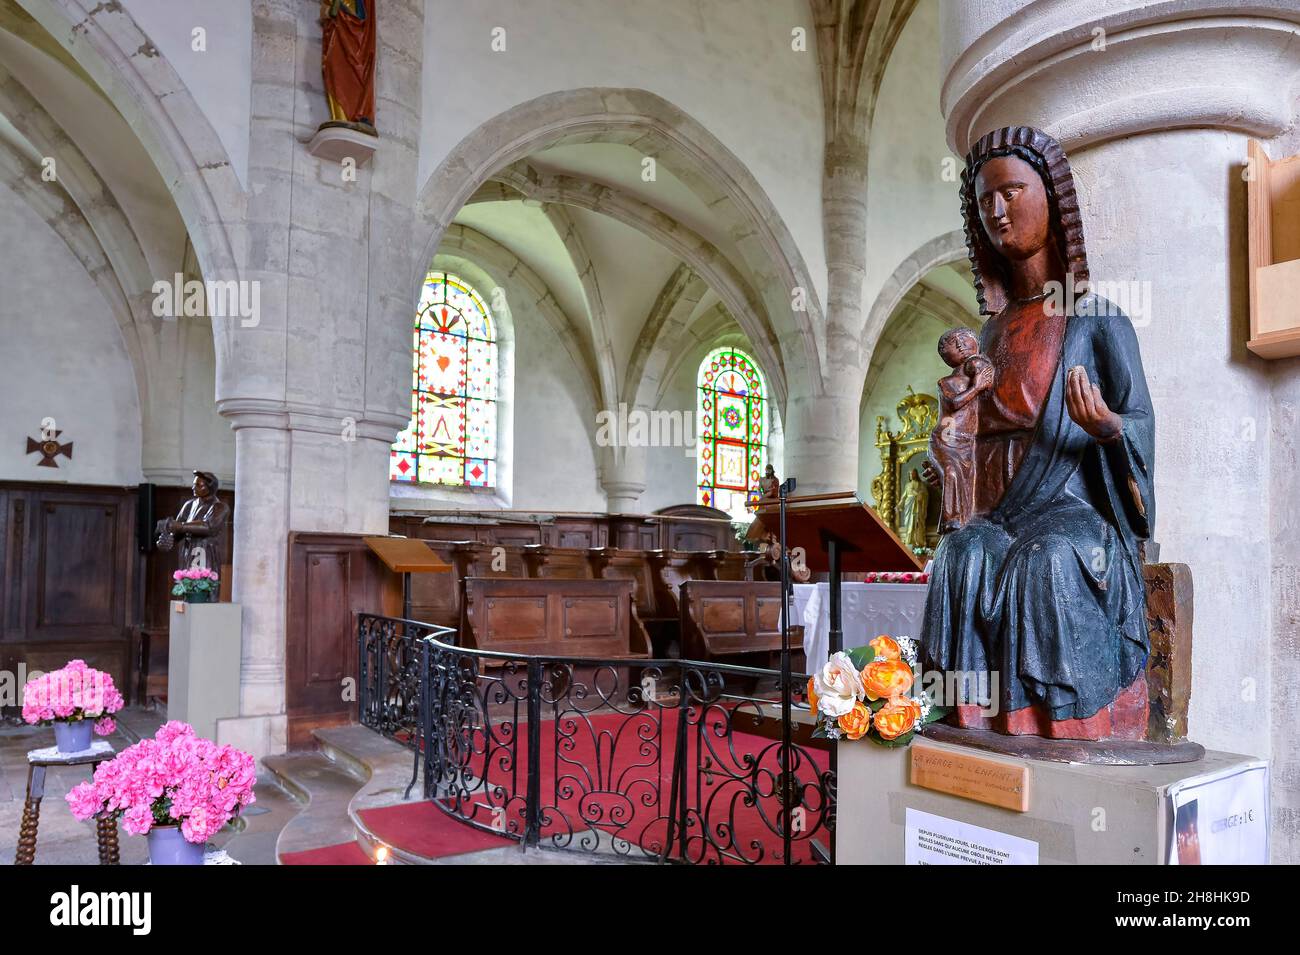 France, Doubs, Ornans, Via Francigena, Loue valley, Mouthier Haute Pierre, inside the church of Saint Laurent, 15th century polychrome wooden statue of Our Lady of Brey Stock Photo